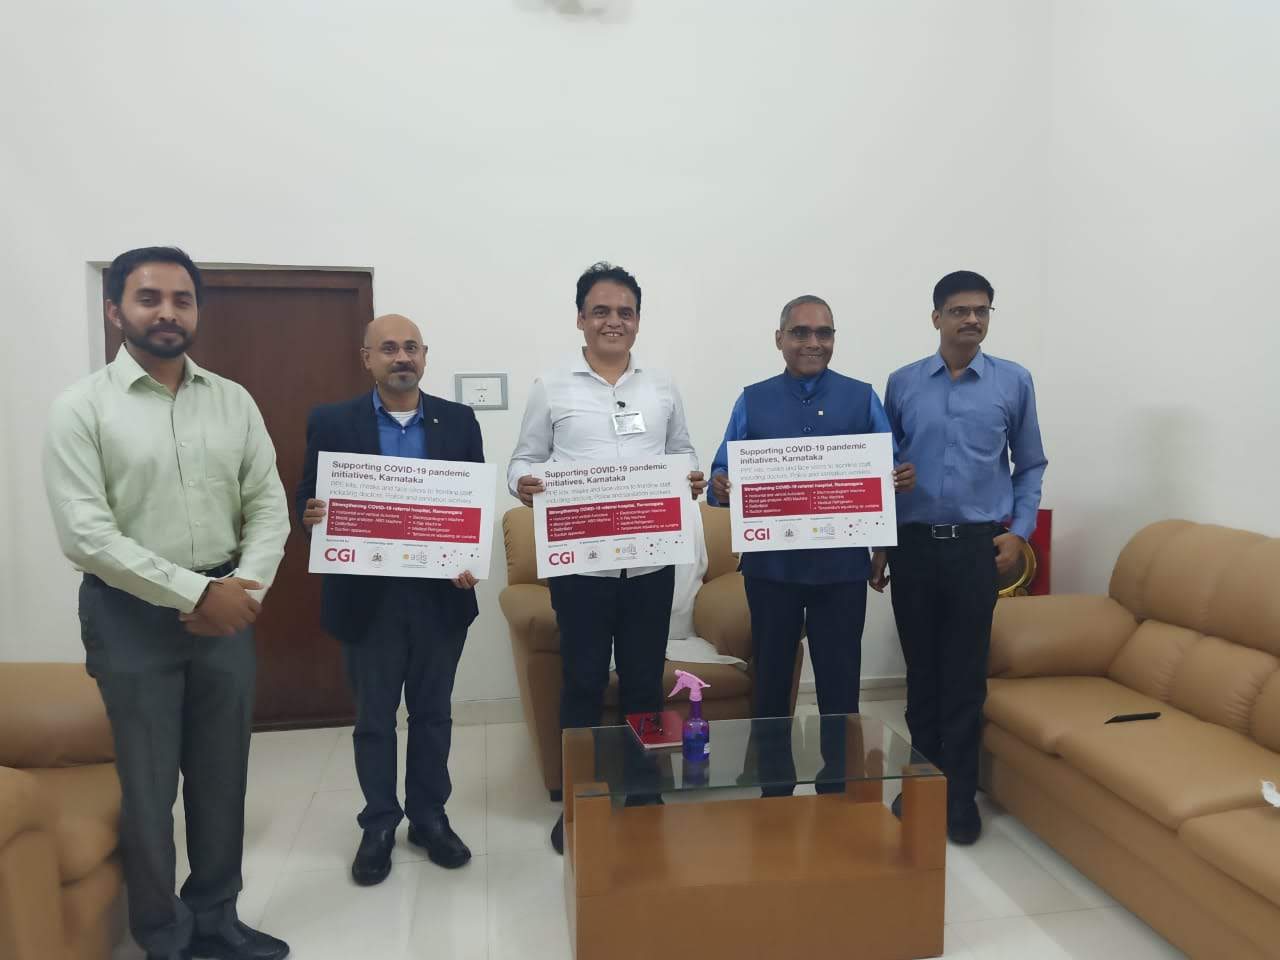 CGI supports Karnataka government in strengthening their pandemic-related efforts